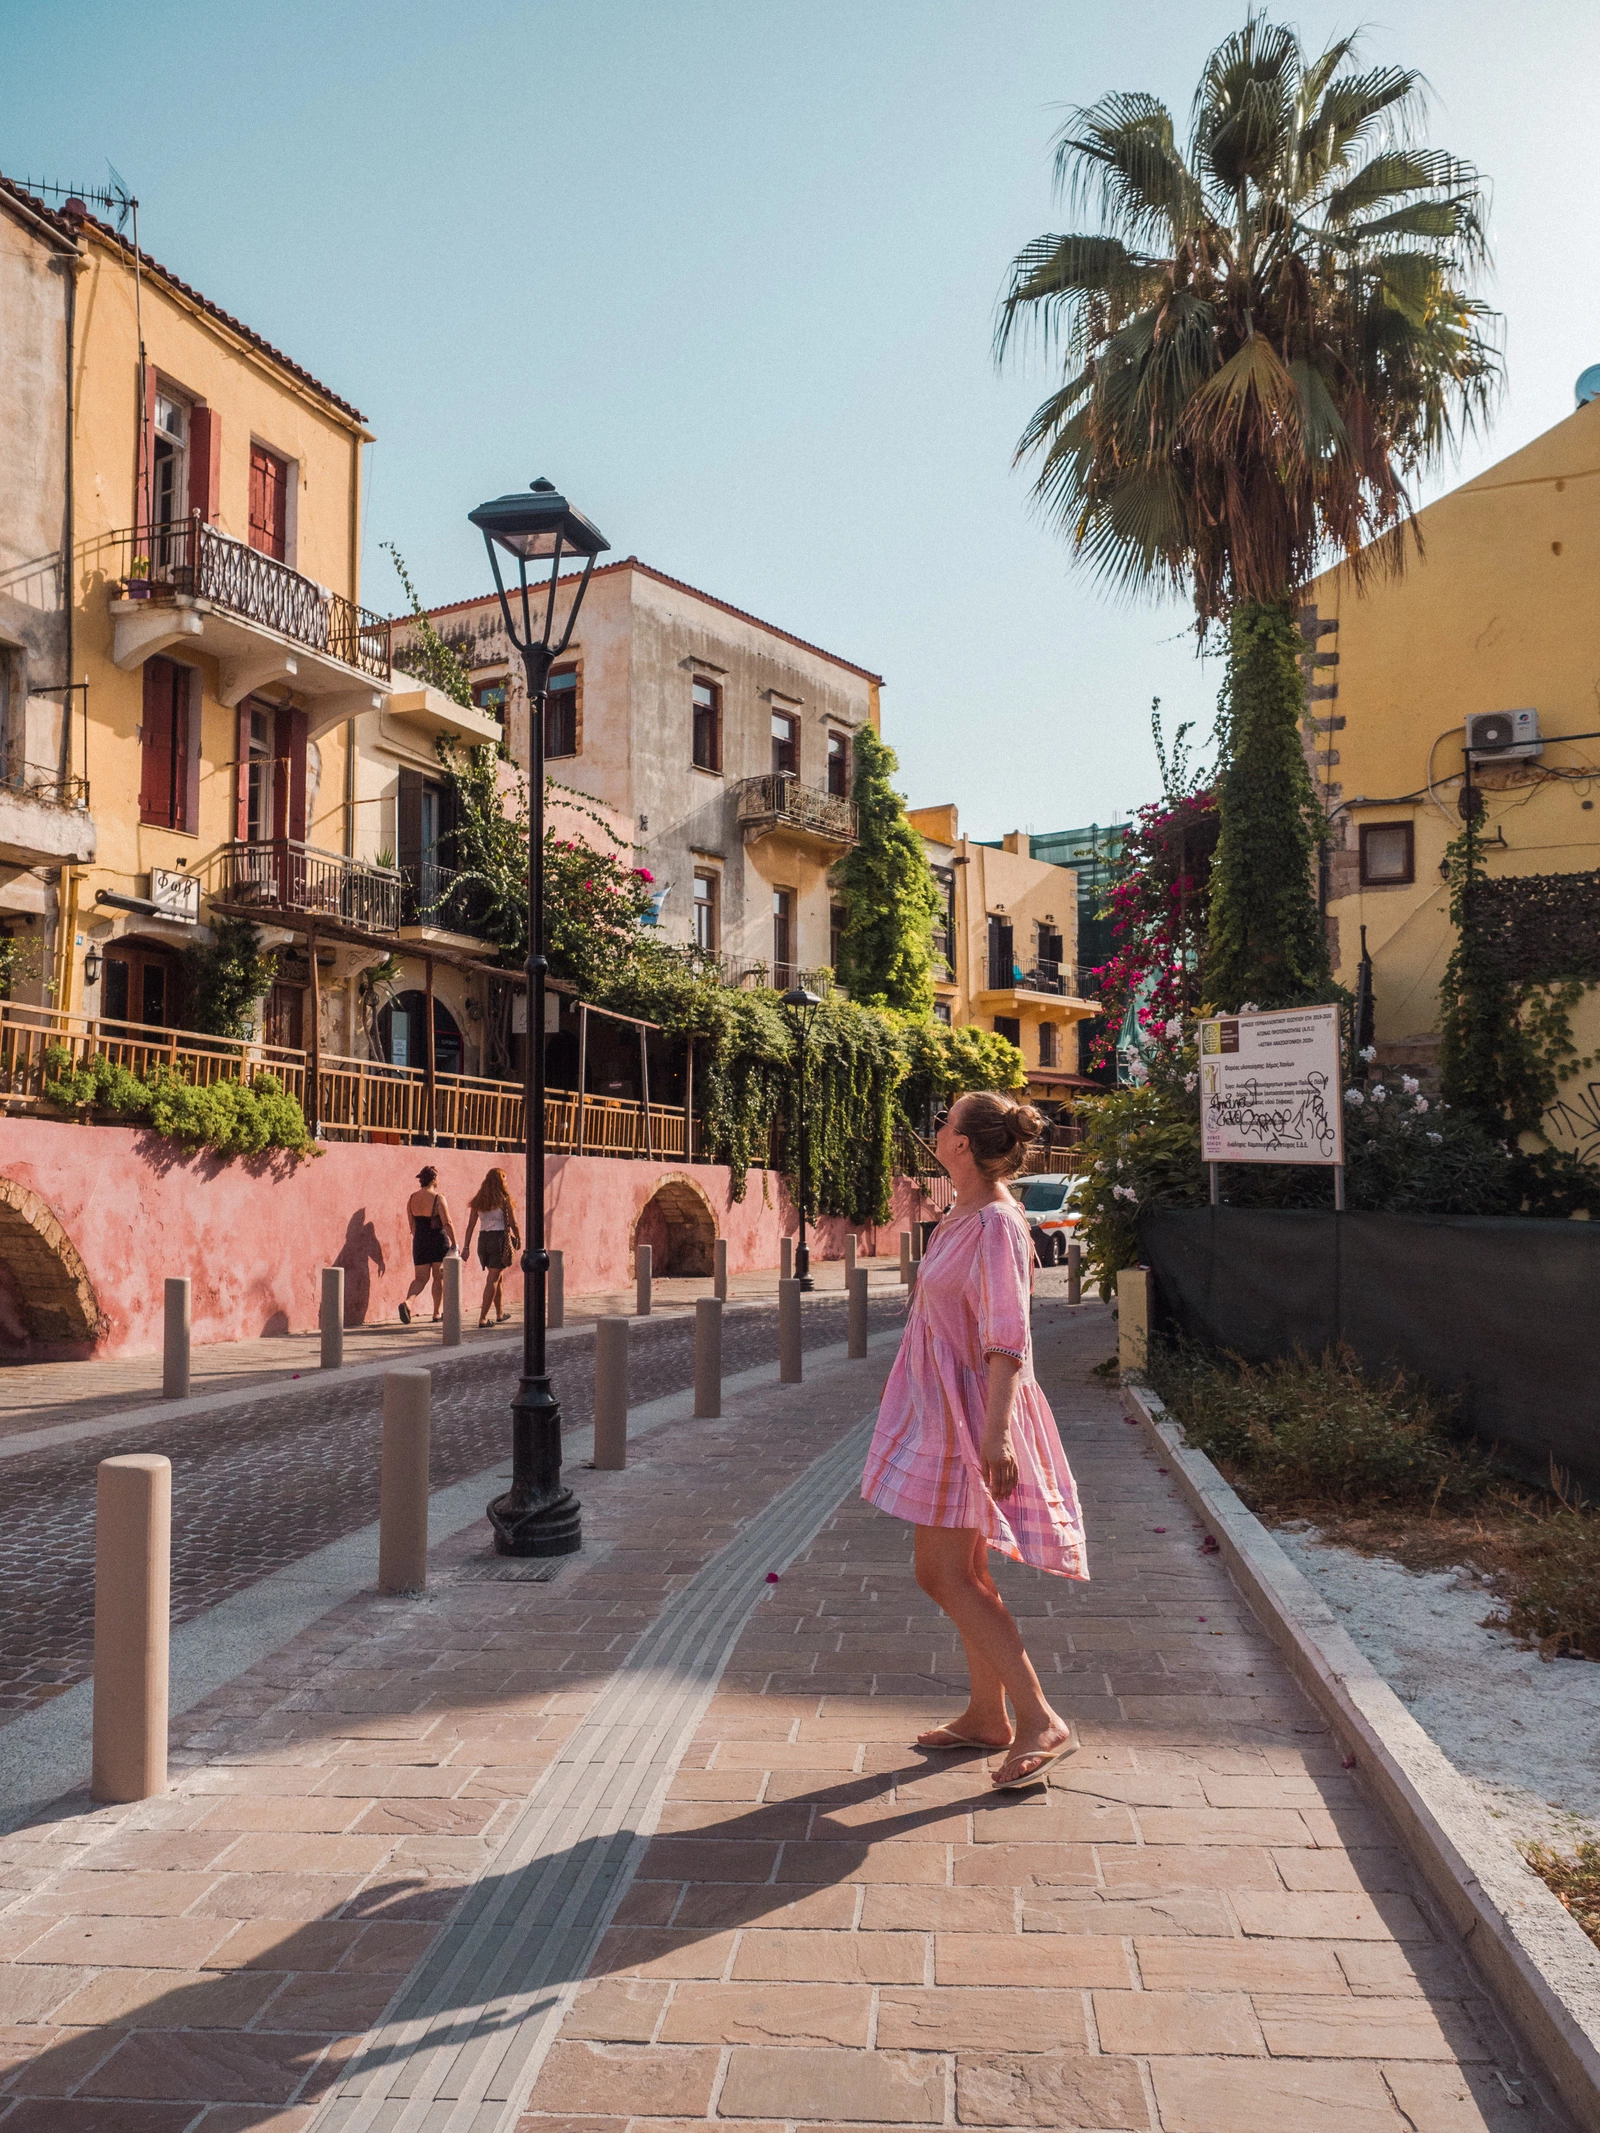 Girl in a pink dress walking up the streets of Chania old town with a palm tree and yellow buildings in the background, one of the top things to do in Chania.